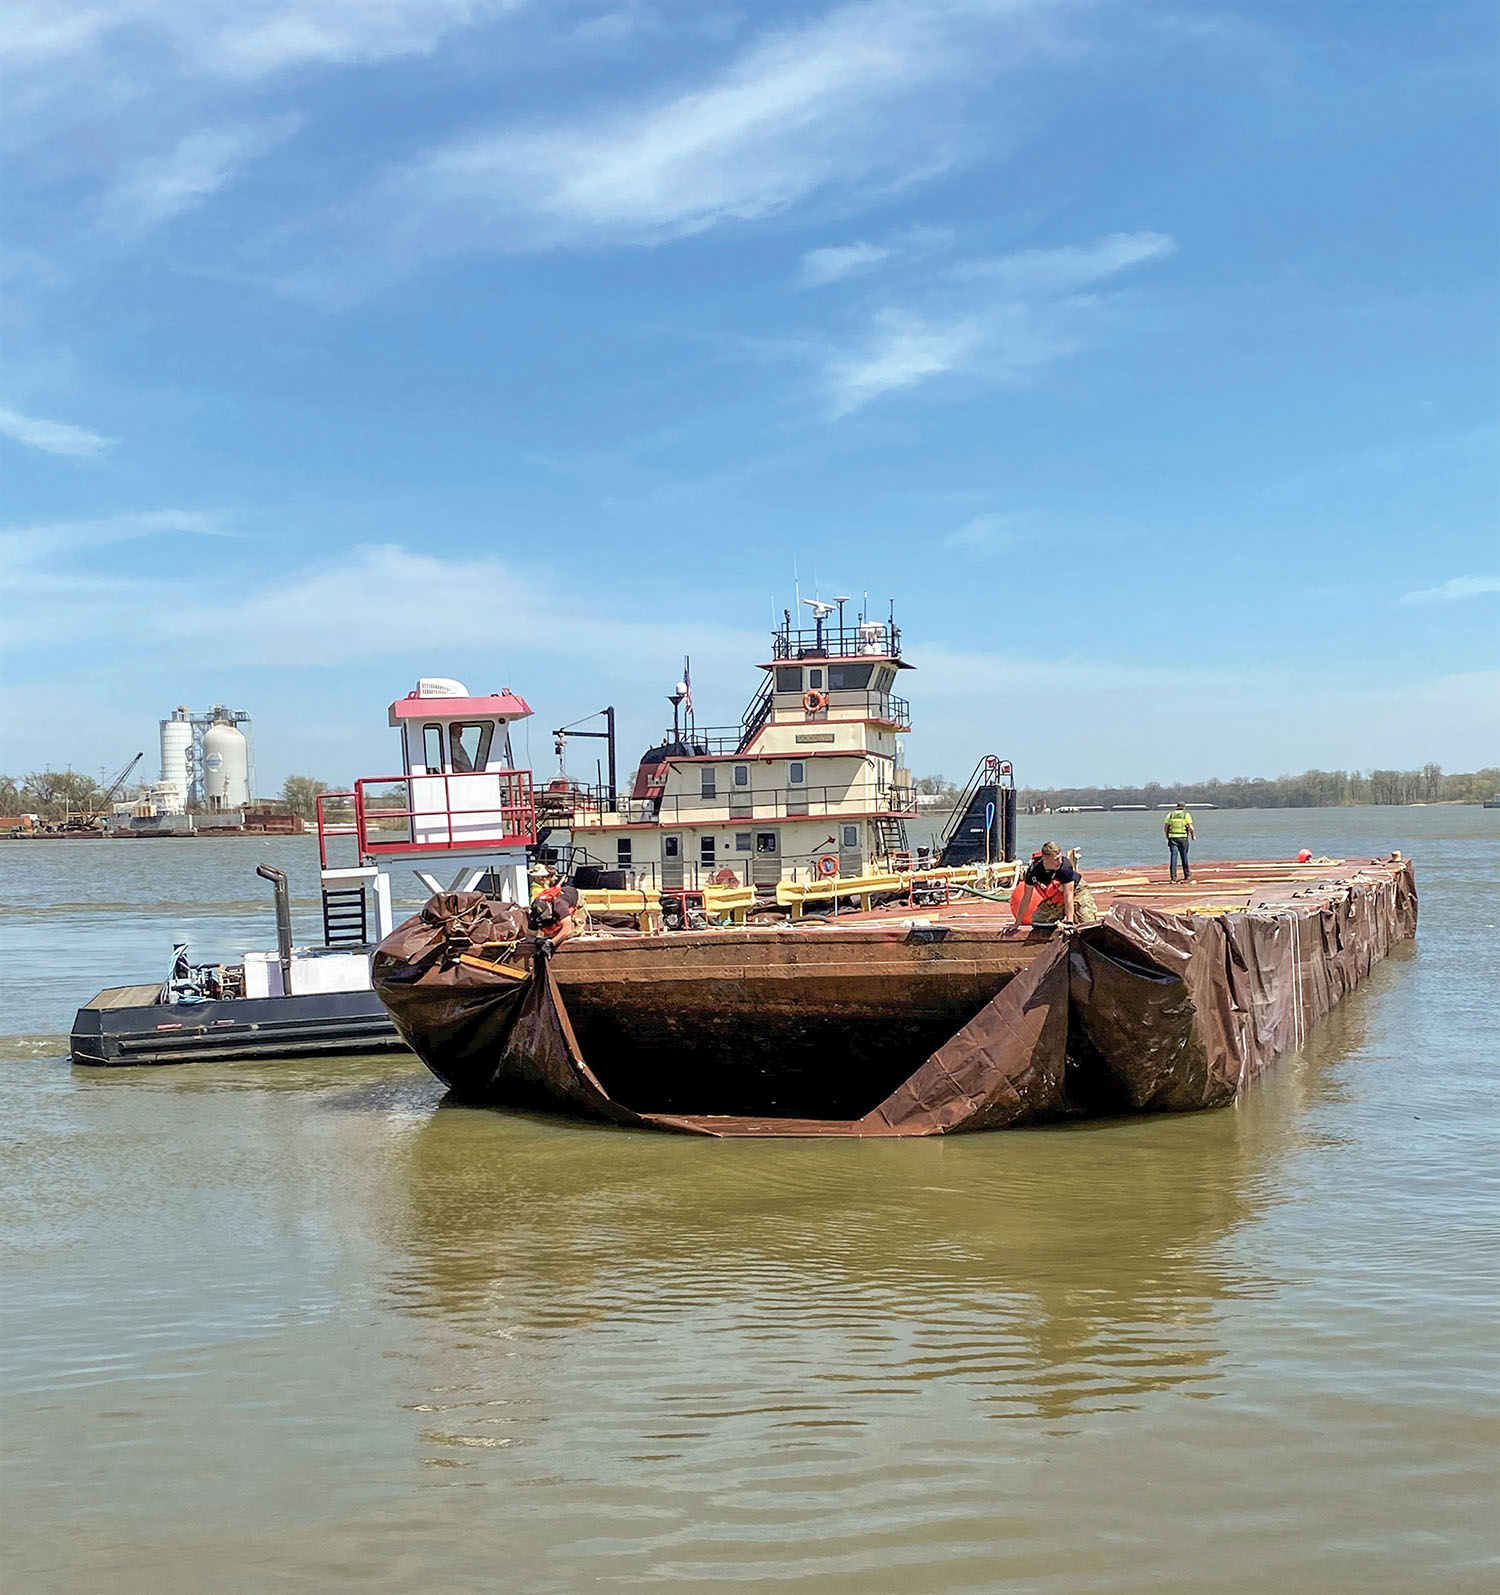 The mv. Goodwin and Ensley Engineer Yard’s truckable towboat remove the barge from the stringout and reposition it for transit to the west bank of the engineer yard for disposal while Army divers attach the front edge of the tarp for transit. (Photo courtesy of the Memphis Engineer District)